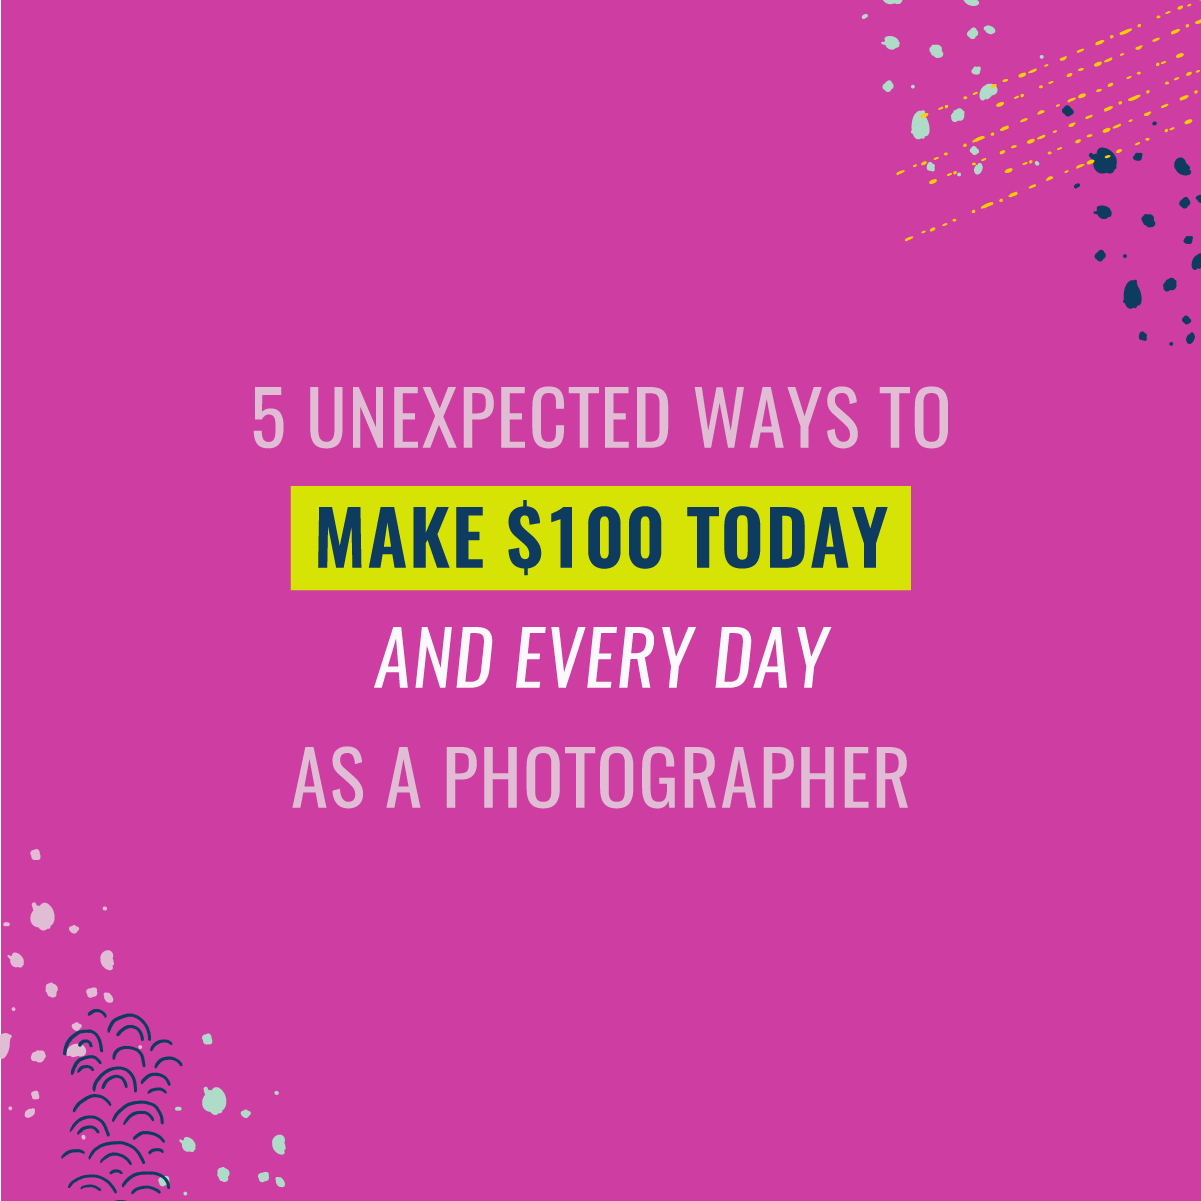 5 unexpected ways to make $100 today and every day as a photographer